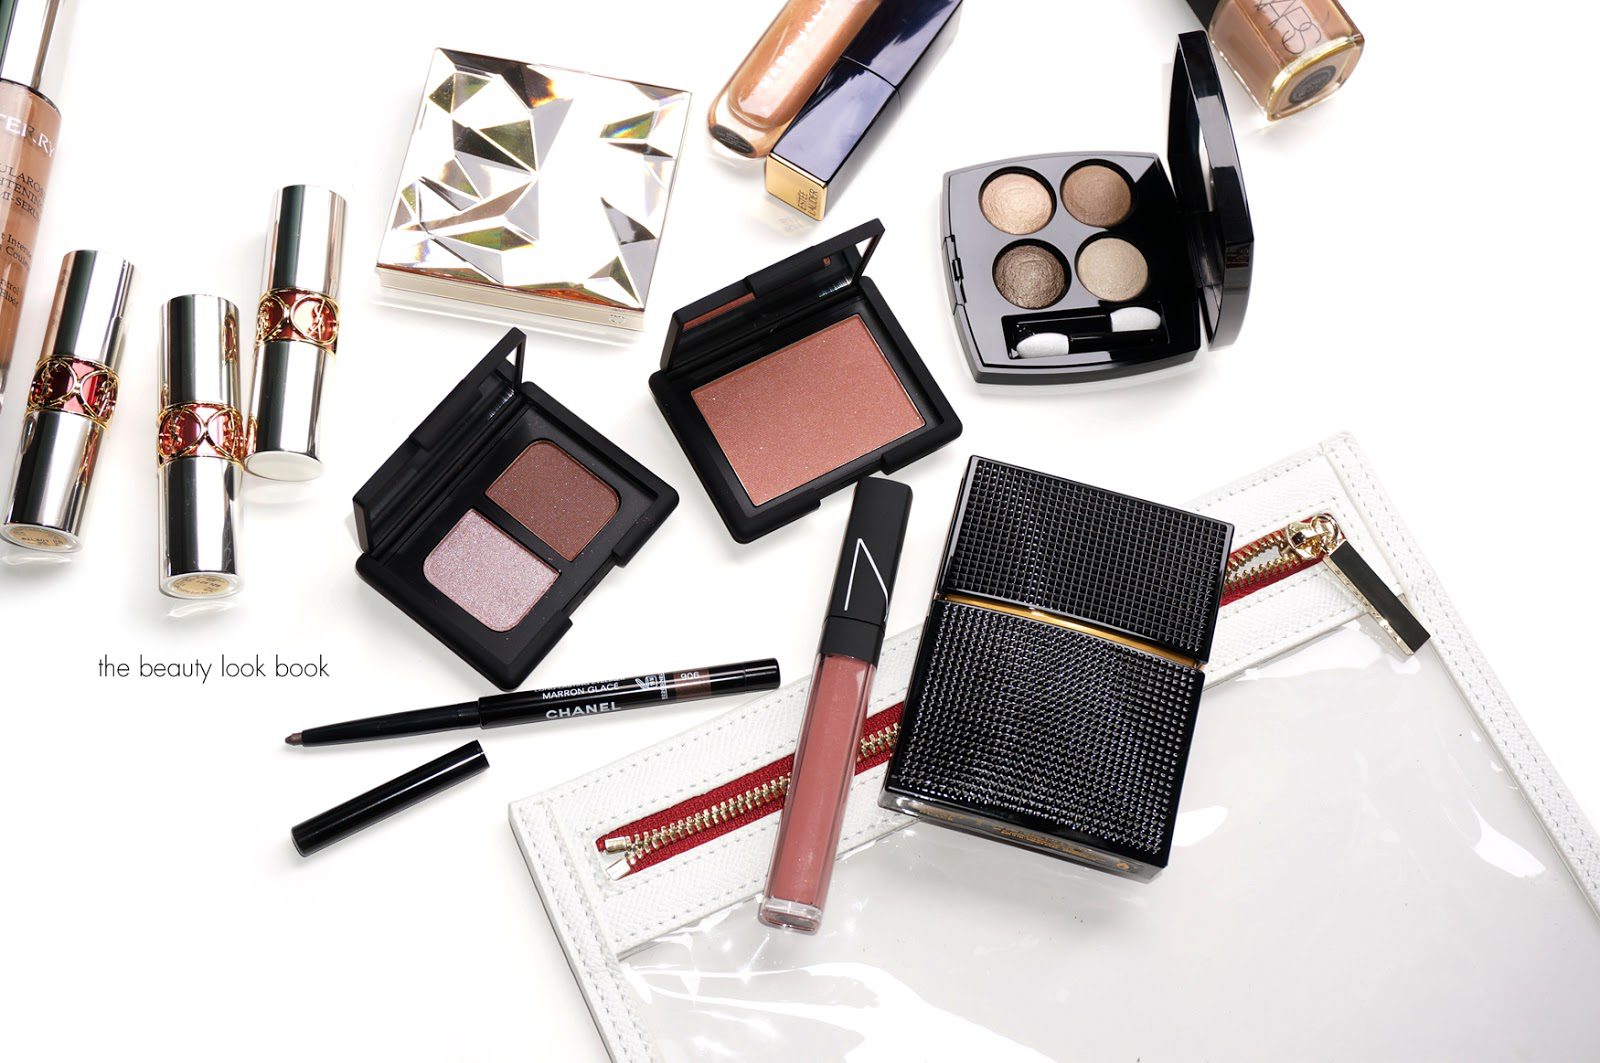 Chanel Archives - The Beauty Look Book